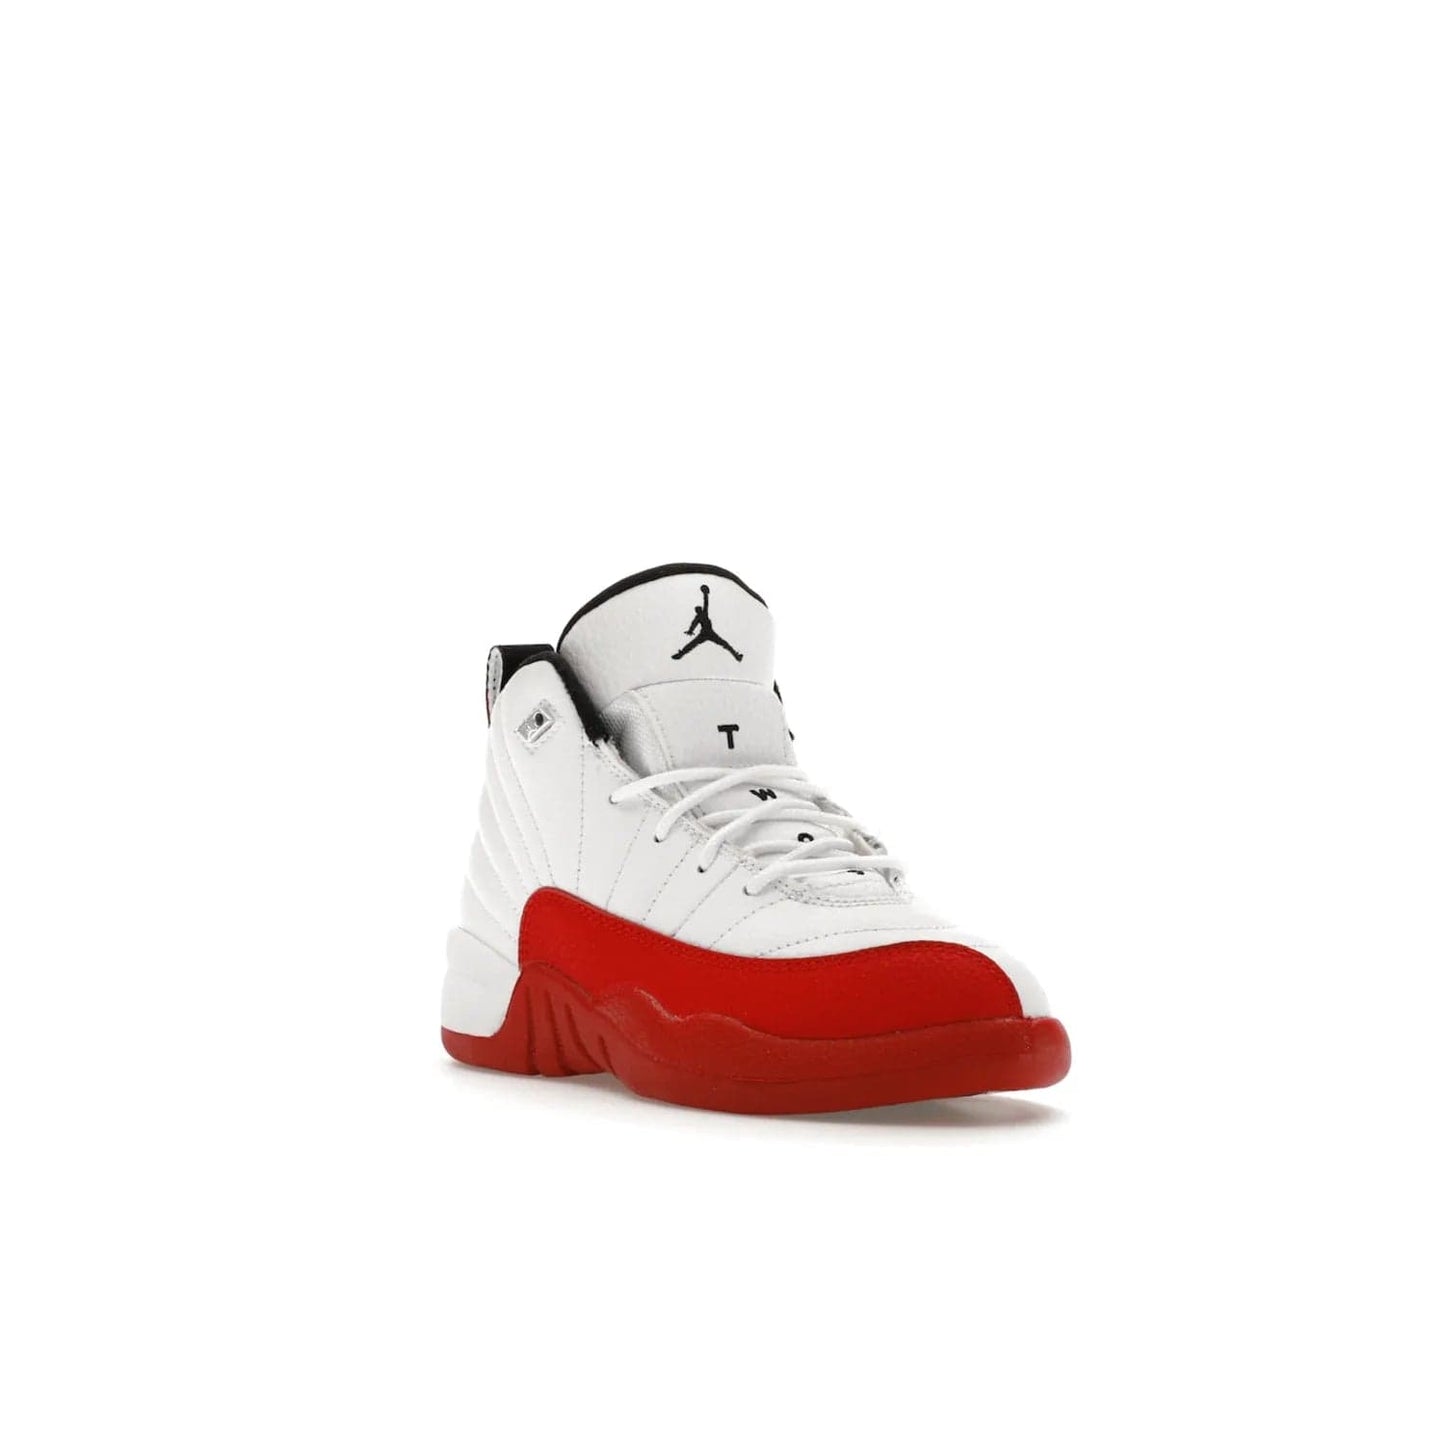 Jordan 12 Retro Cherry (2023) (PS) - Image 6 - Only at www.BallersClubKickz.com - Jordan 12 Retro Cherry dropping for toddlers in 2023! White leather upper with black overlays and red branding. Classic court style for your little one.